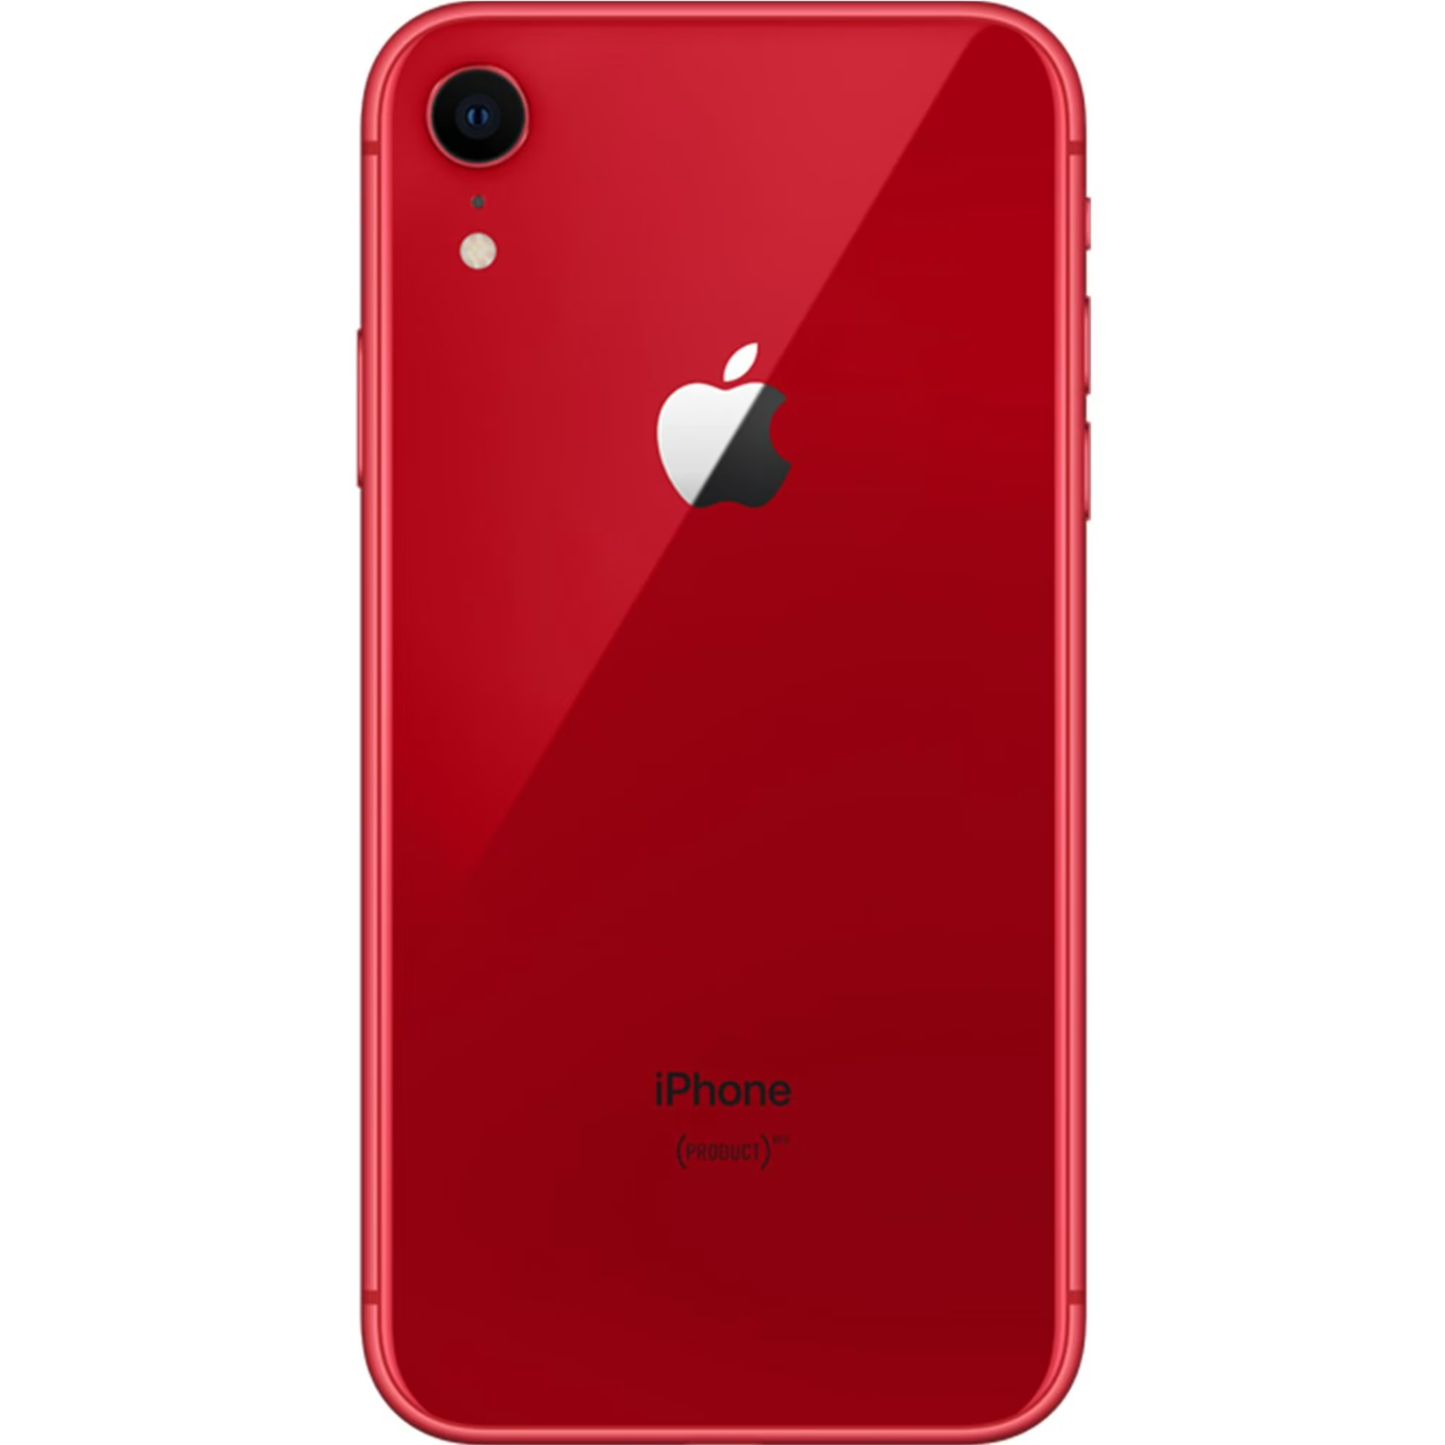 iPhone XR (128gb) - RED